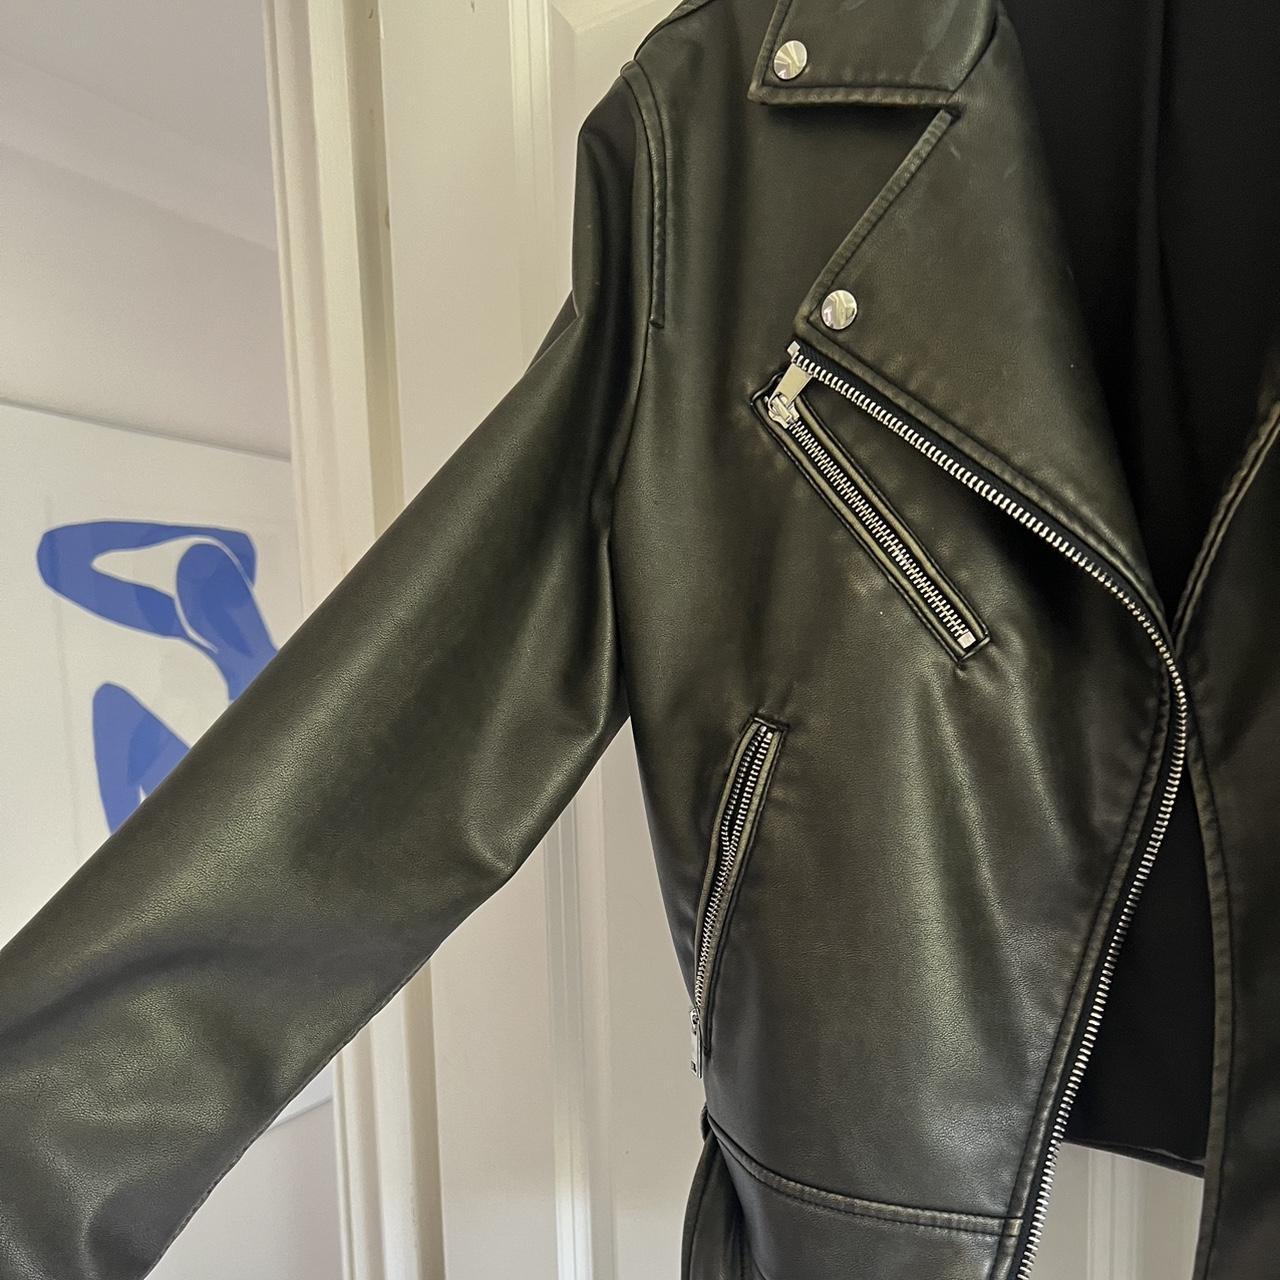 Molly mae leather jacket size large from zara - Depop